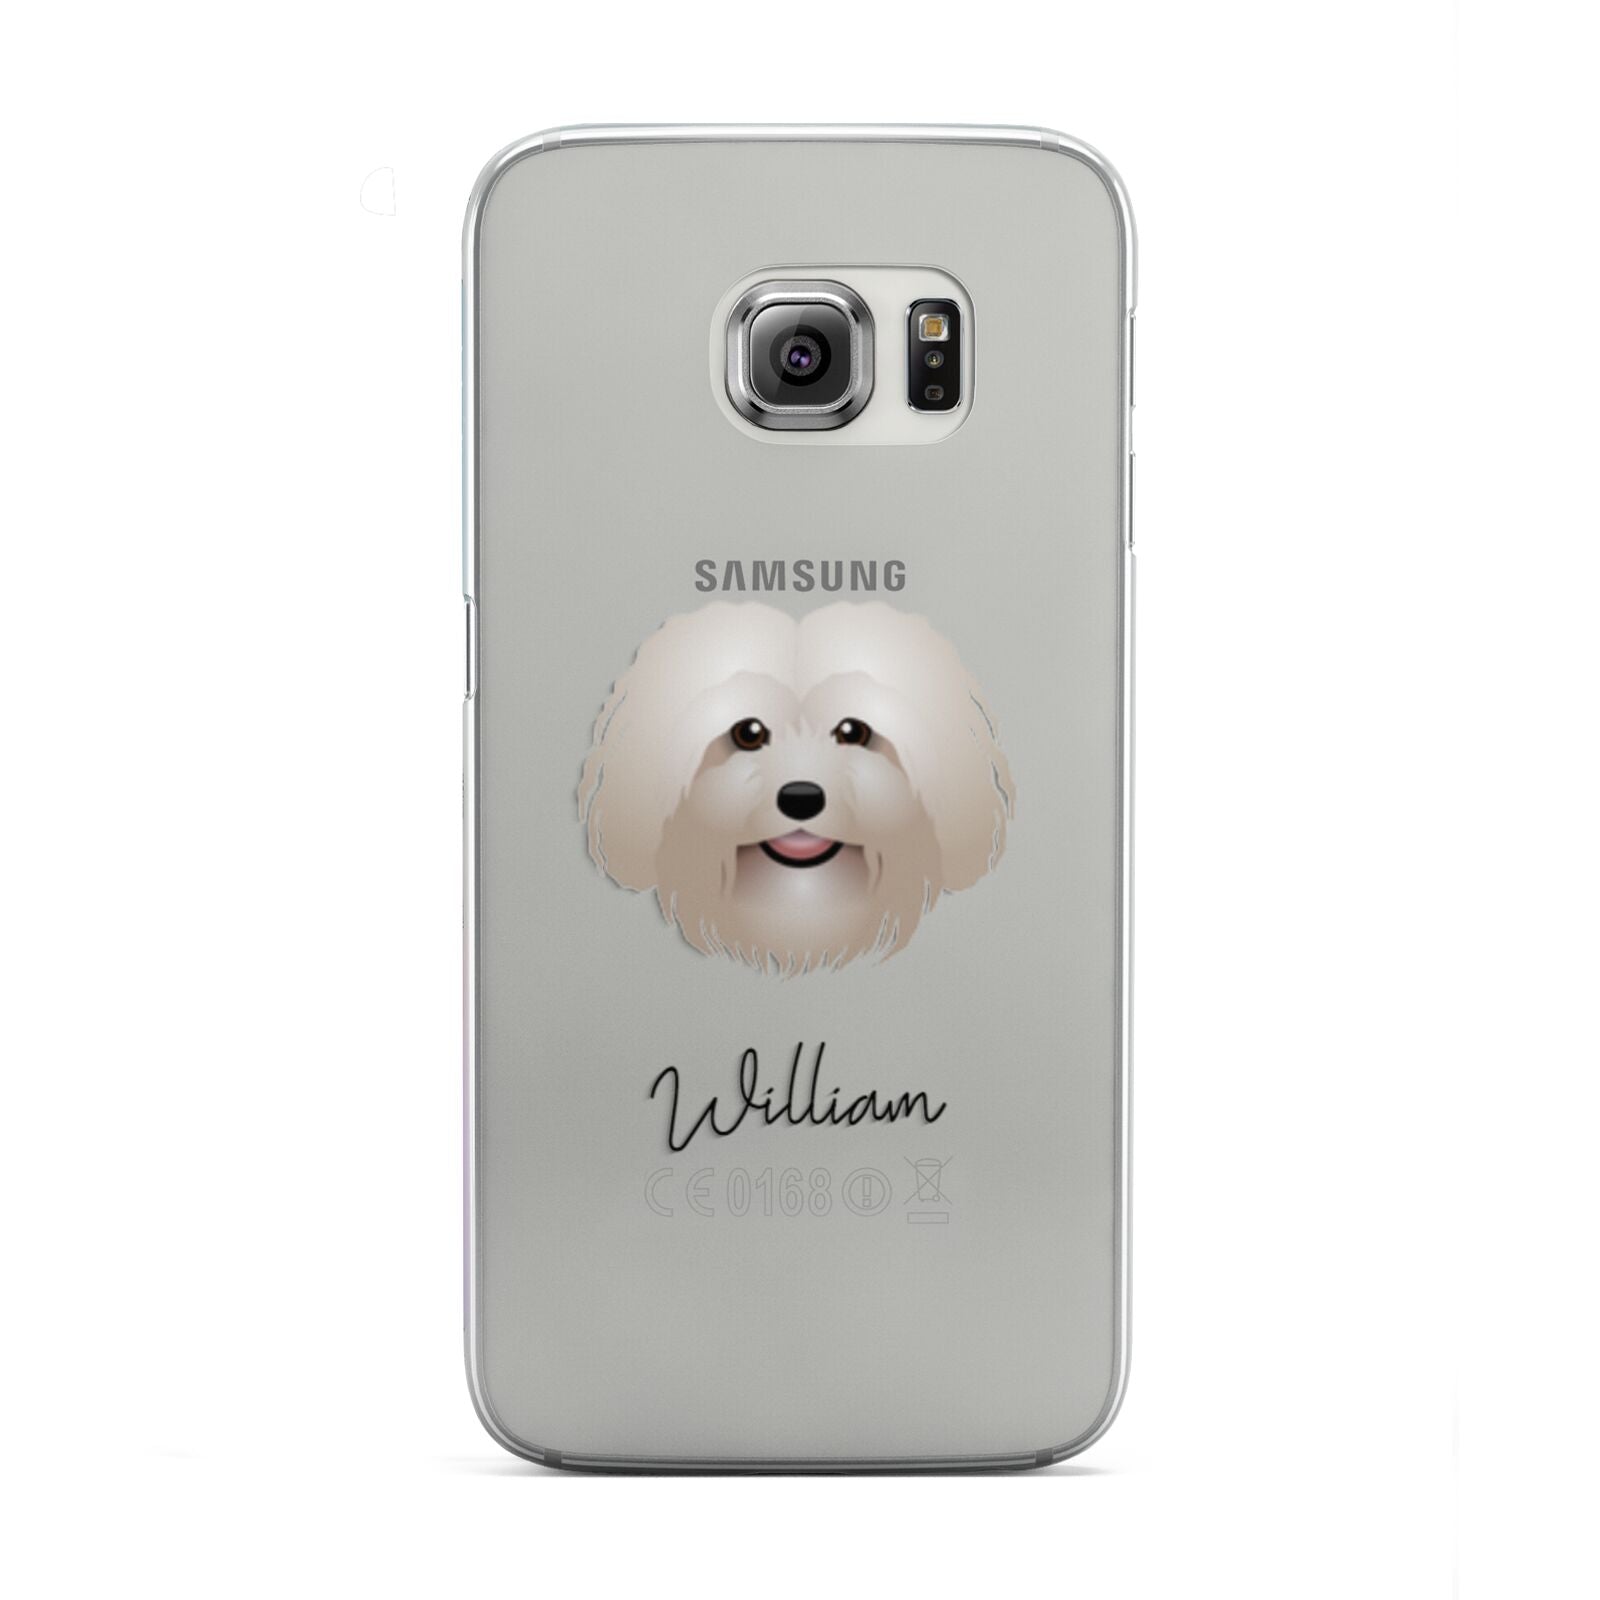 Bolognese Personalised Samsung Galaxy S6 Edge Case